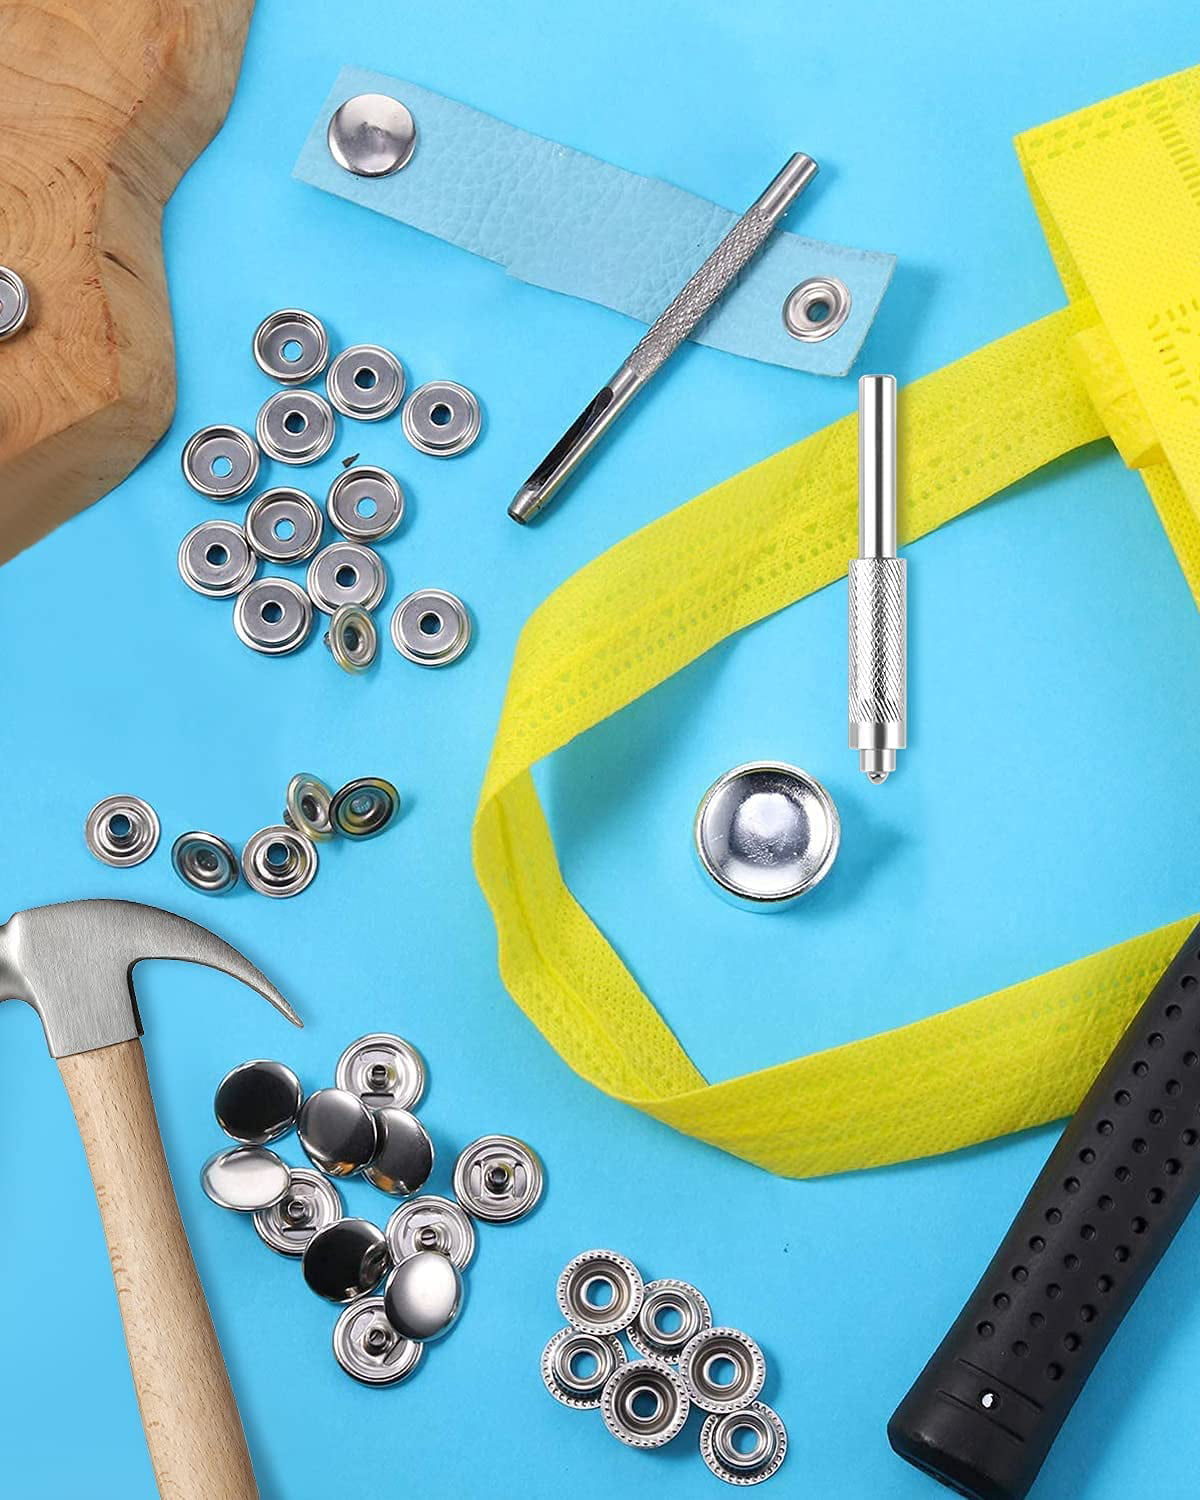 MTFun Fastener Screw Snaps Kit, High Grade Copper Material, Press Studs Snap  Fasteners Clothing Snaps Button For Bags, Jeans, Clothes, Fabric, Leather  Craft 